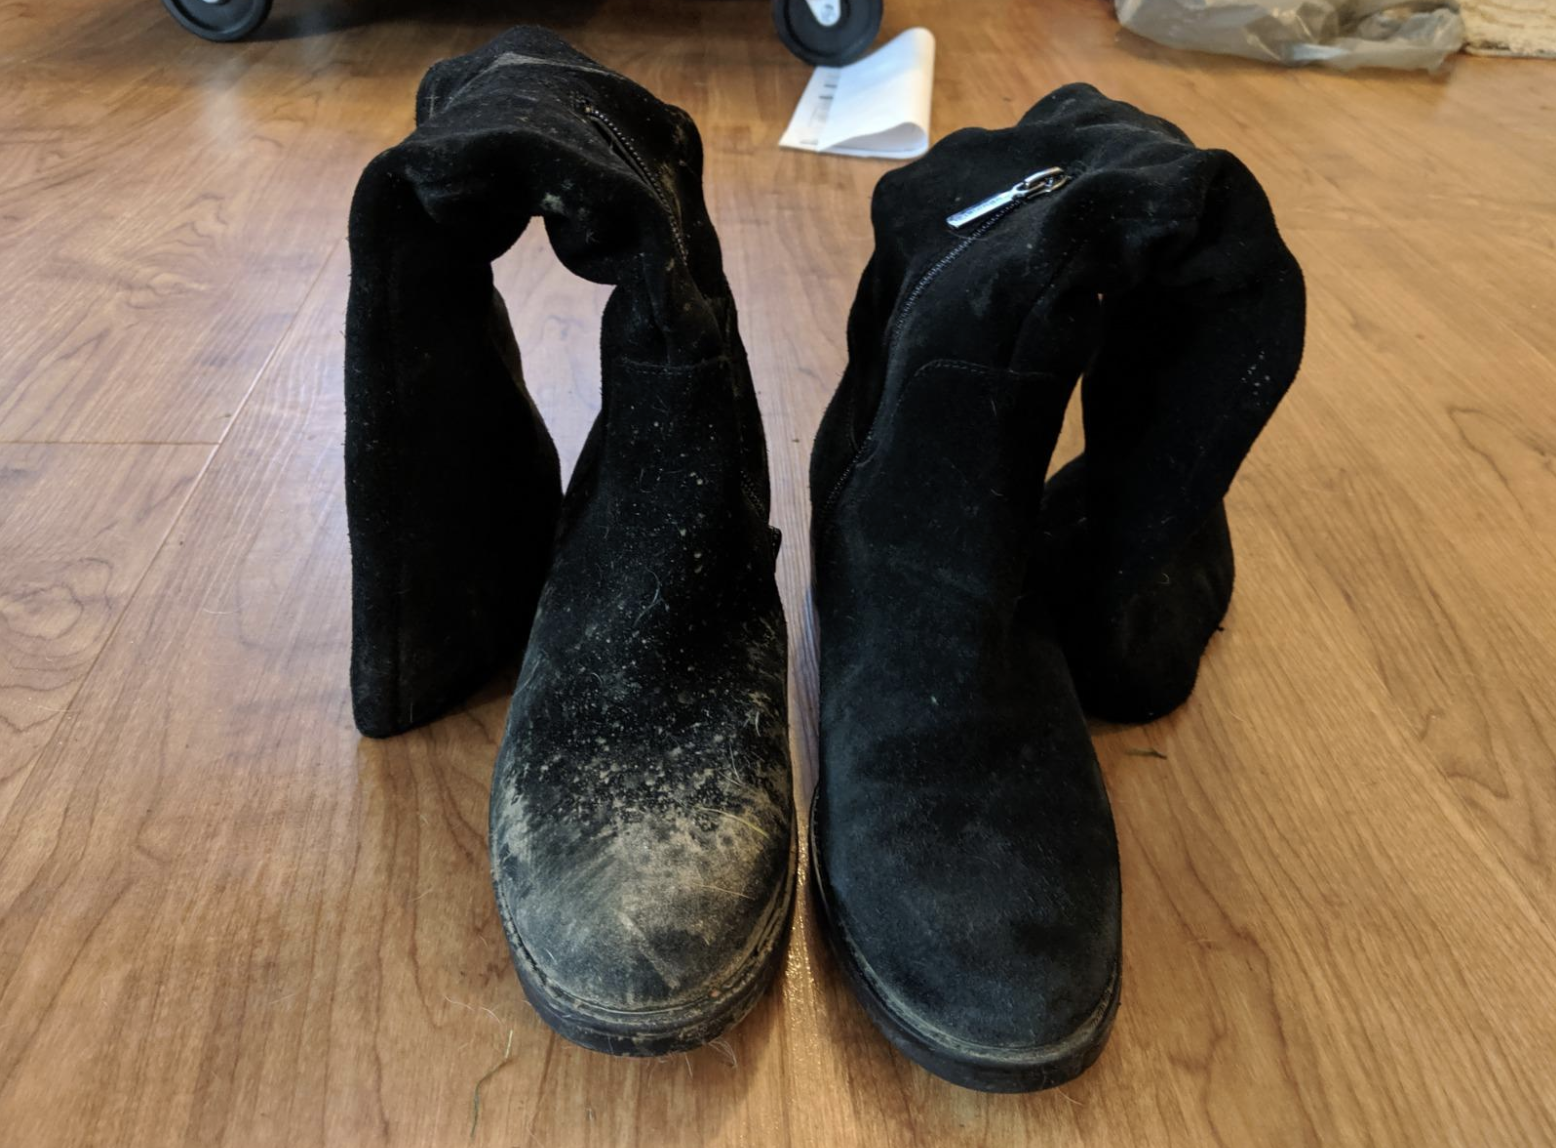 Reviewer image of their boots, one is covered in scuffs and stains and the other is clean from the brush